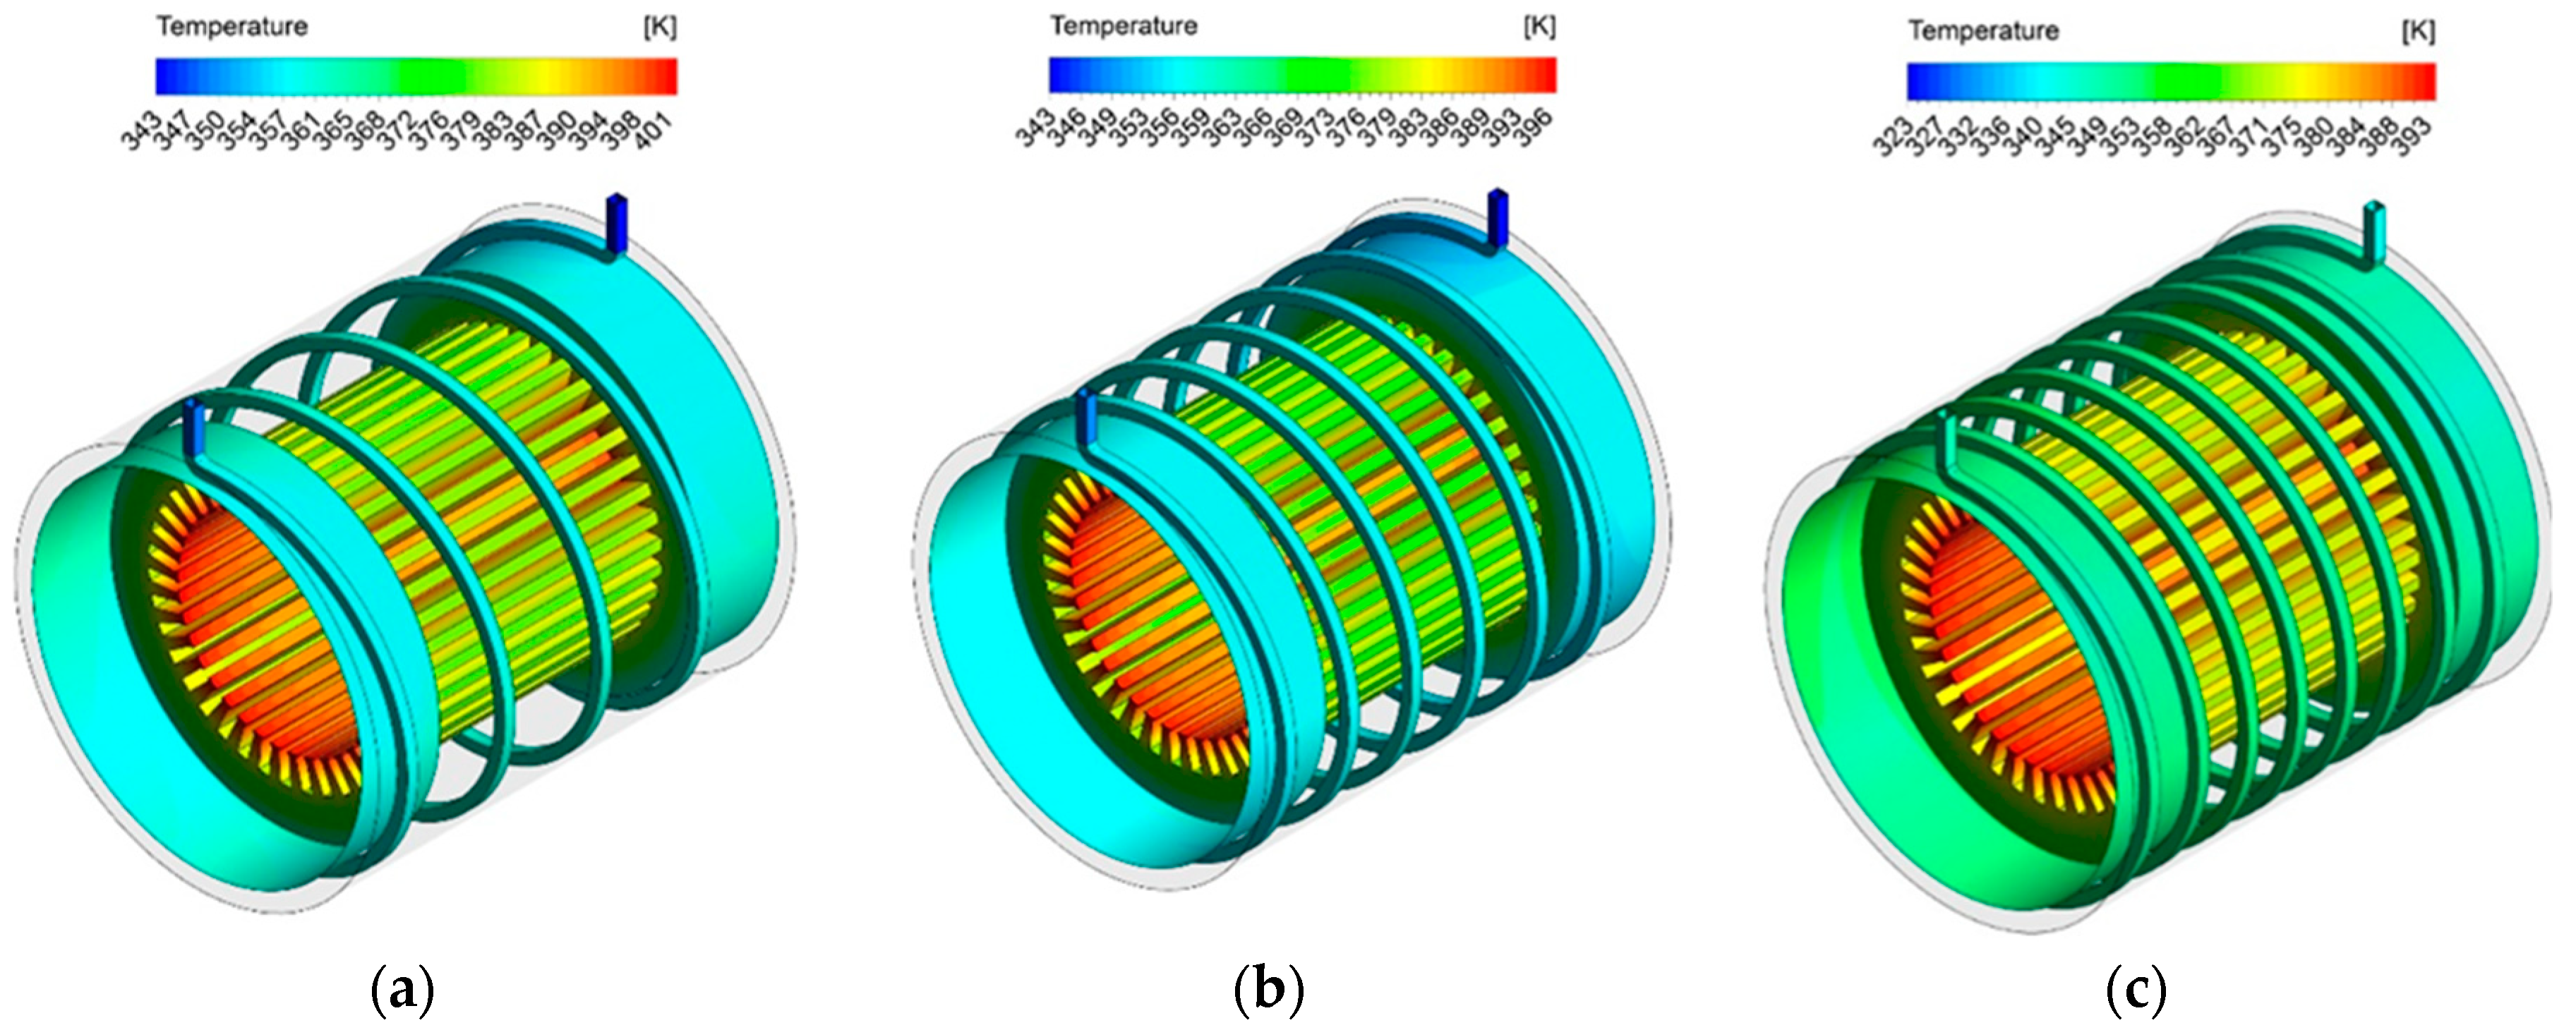 Entropy | Free Full-Text | On Heat Transfer Performance of Cooling Systems  Using Nanofluid for Electric Motor Applications